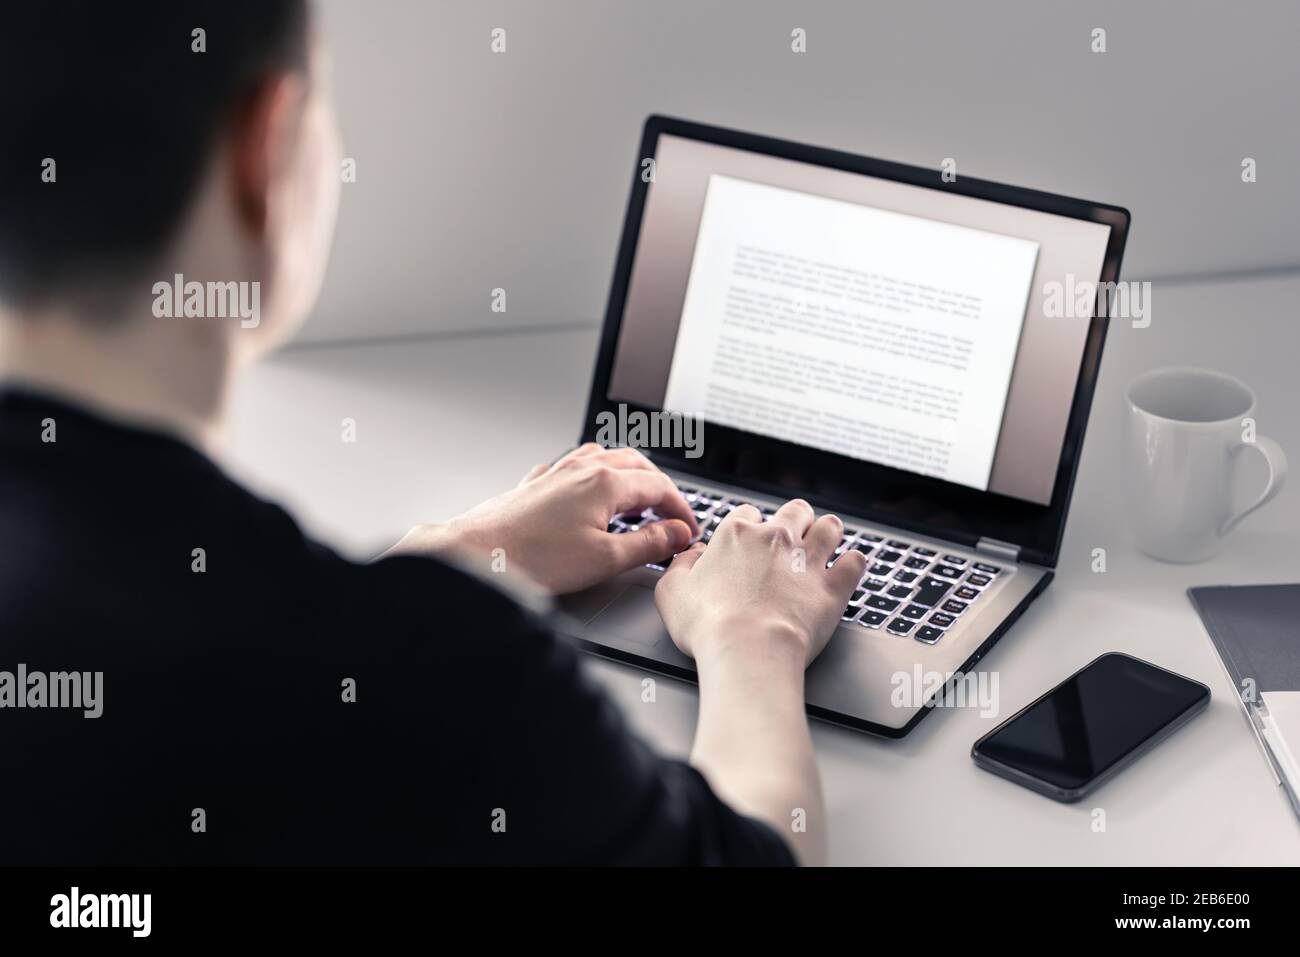 Man writing with laptop. Job applicant making his resume, cv or application. Freelance writer, journalist or teacher working in home office. Stock Photo